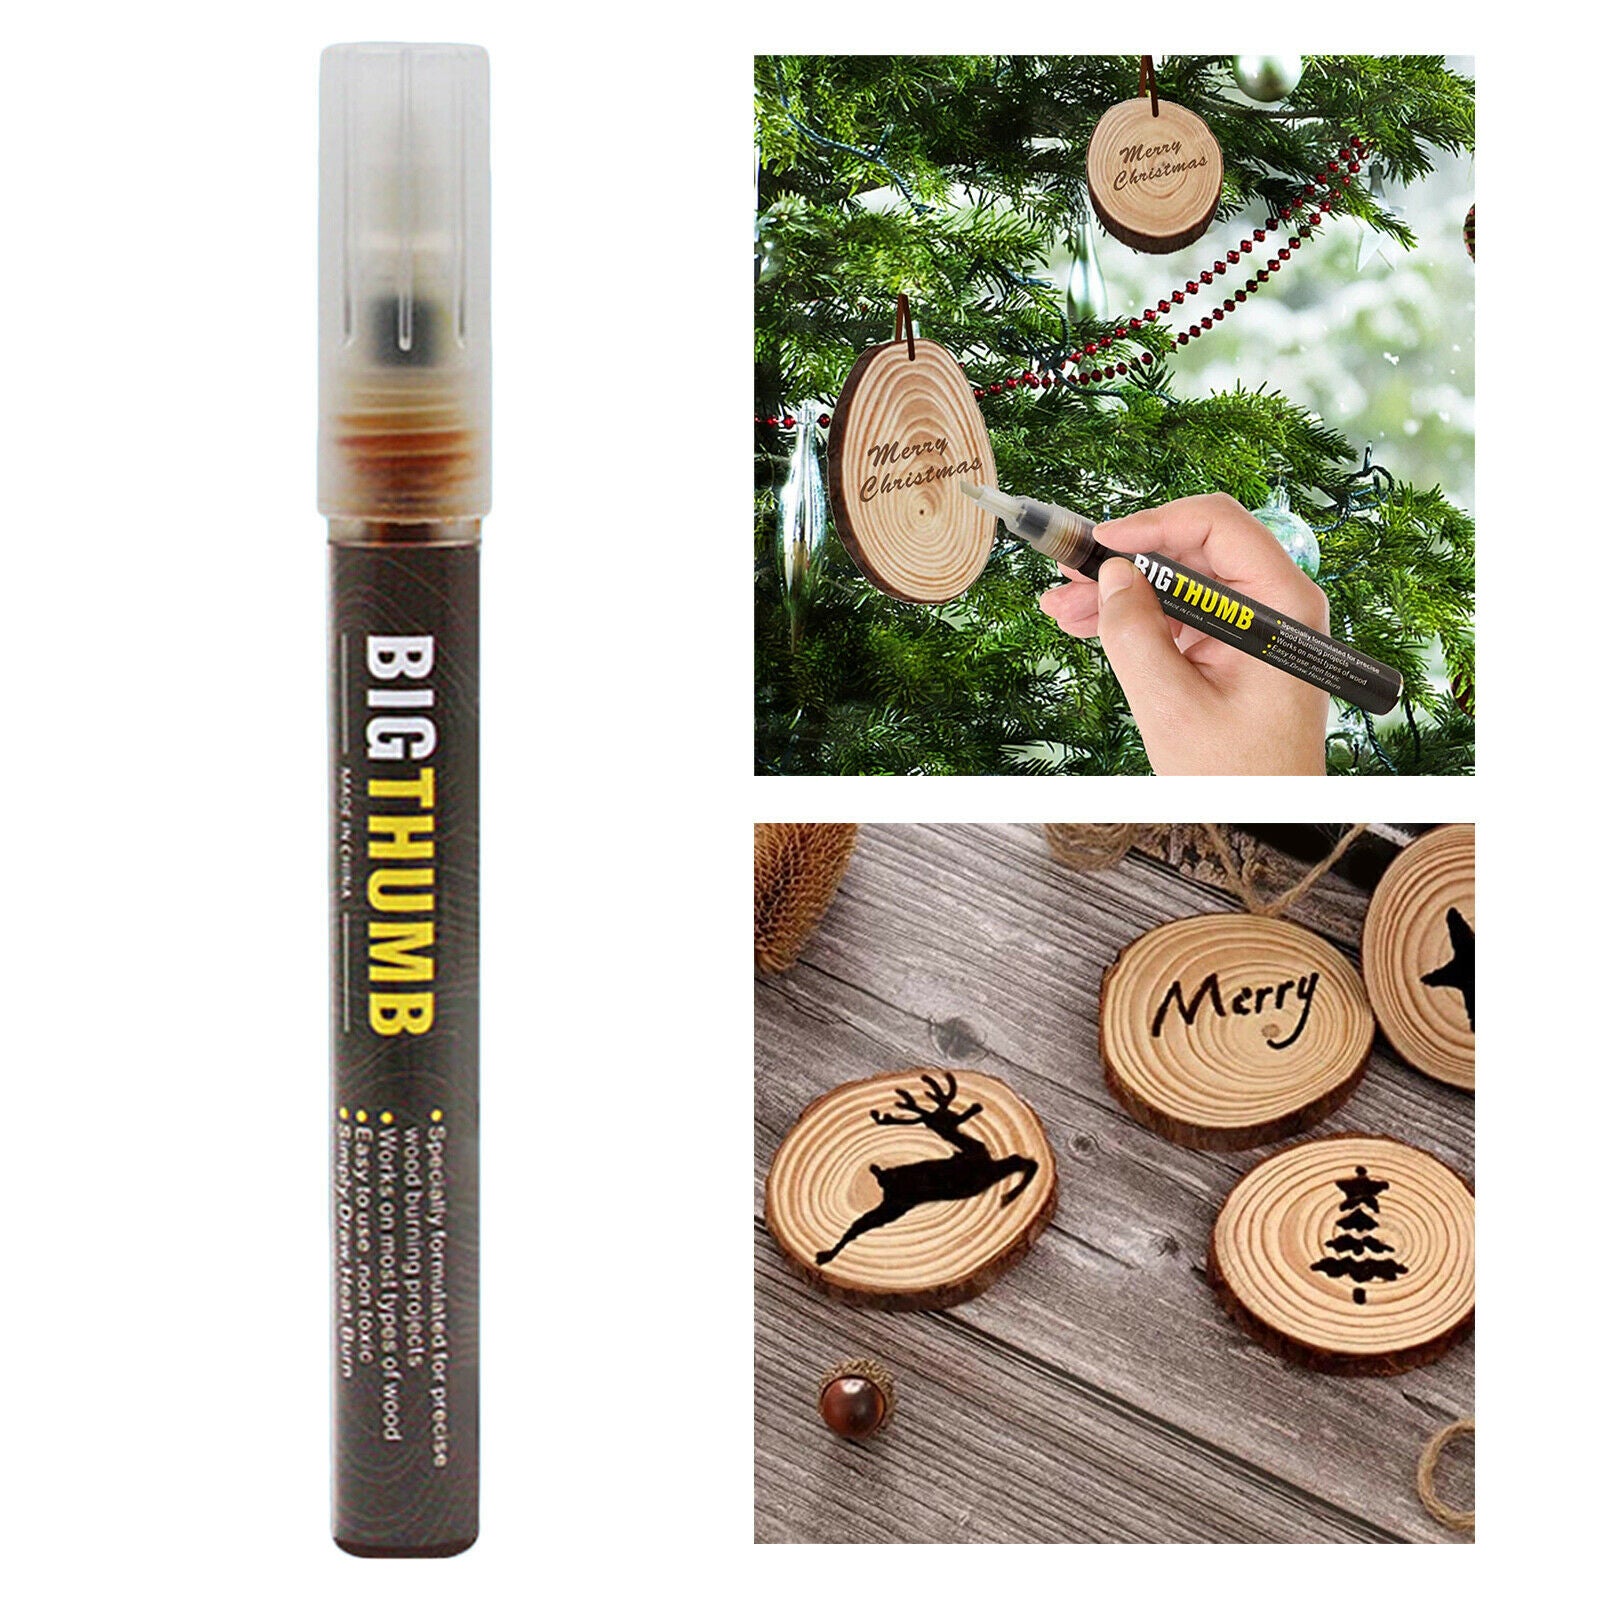 Safe Scorch Marker DIY Projects Easy Use Safe of Chemical Wood Burning Pen